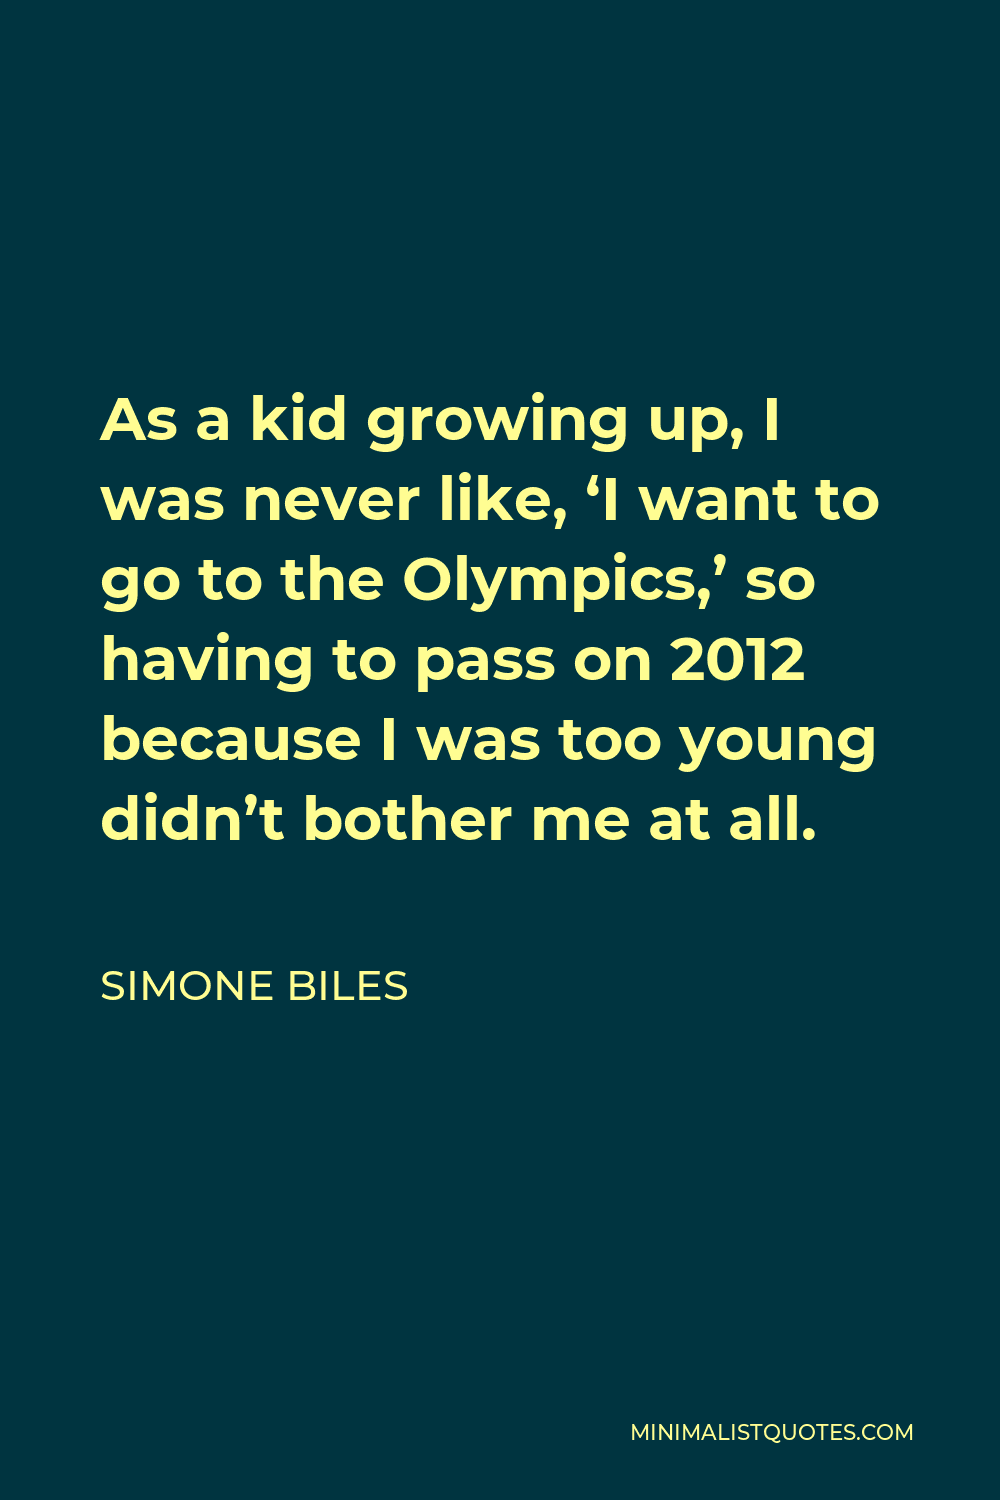 Simone Biles Quote - As a kid growing up, I was never like, ‘I want to go to the Olympics,’ so having to pass on 2012 because I was too young didn’t bother me at all.